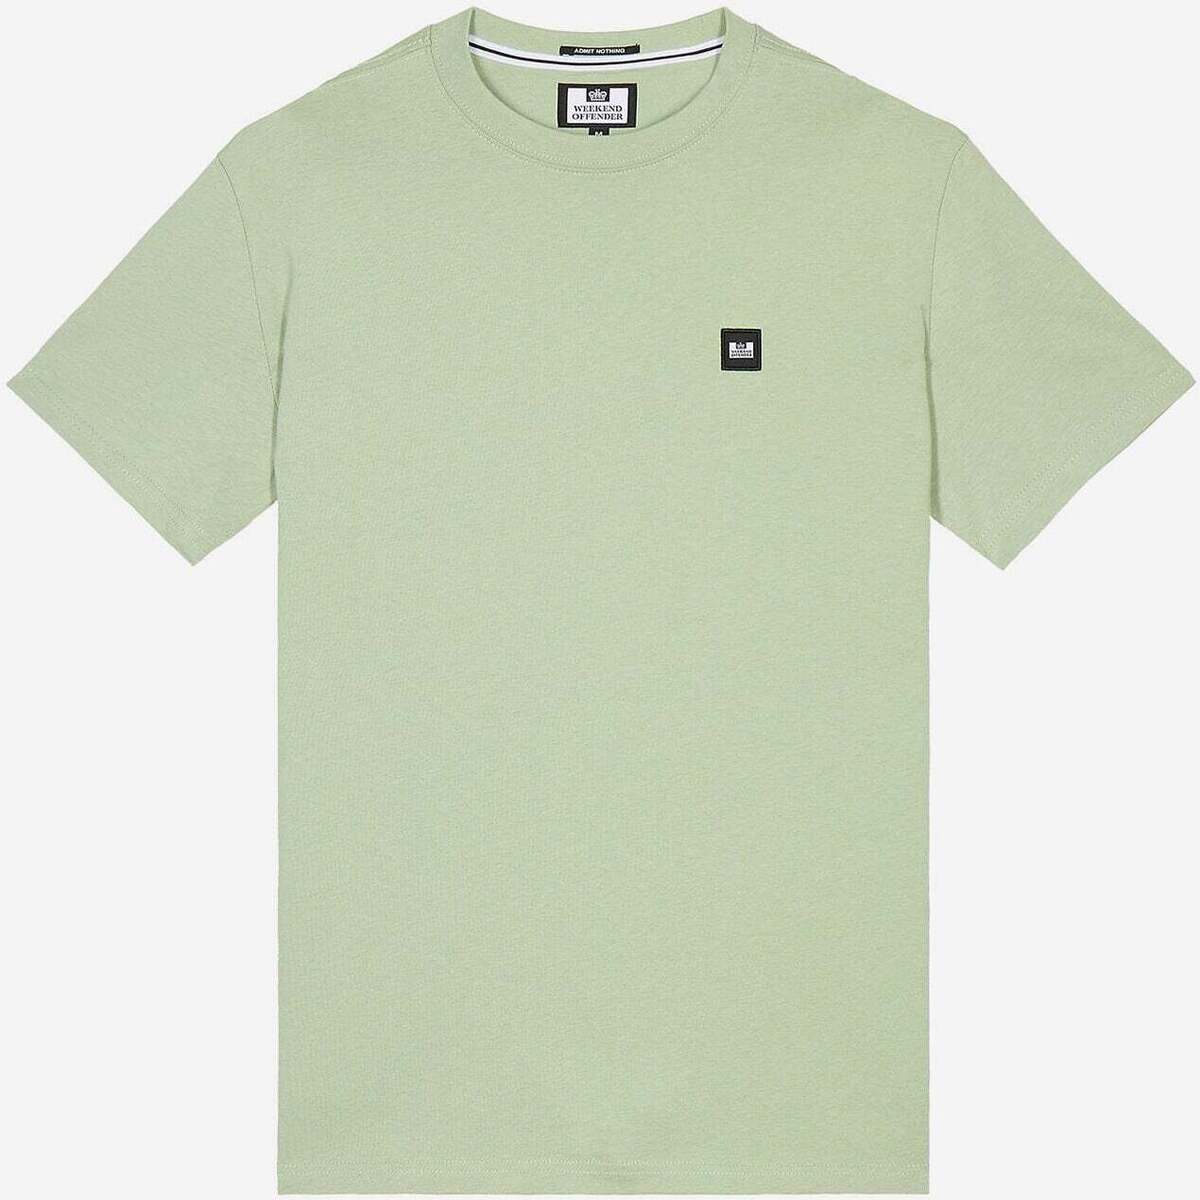 Textiel Heren T-shirts & Polo’s Weekend Offender Cannon beach Other